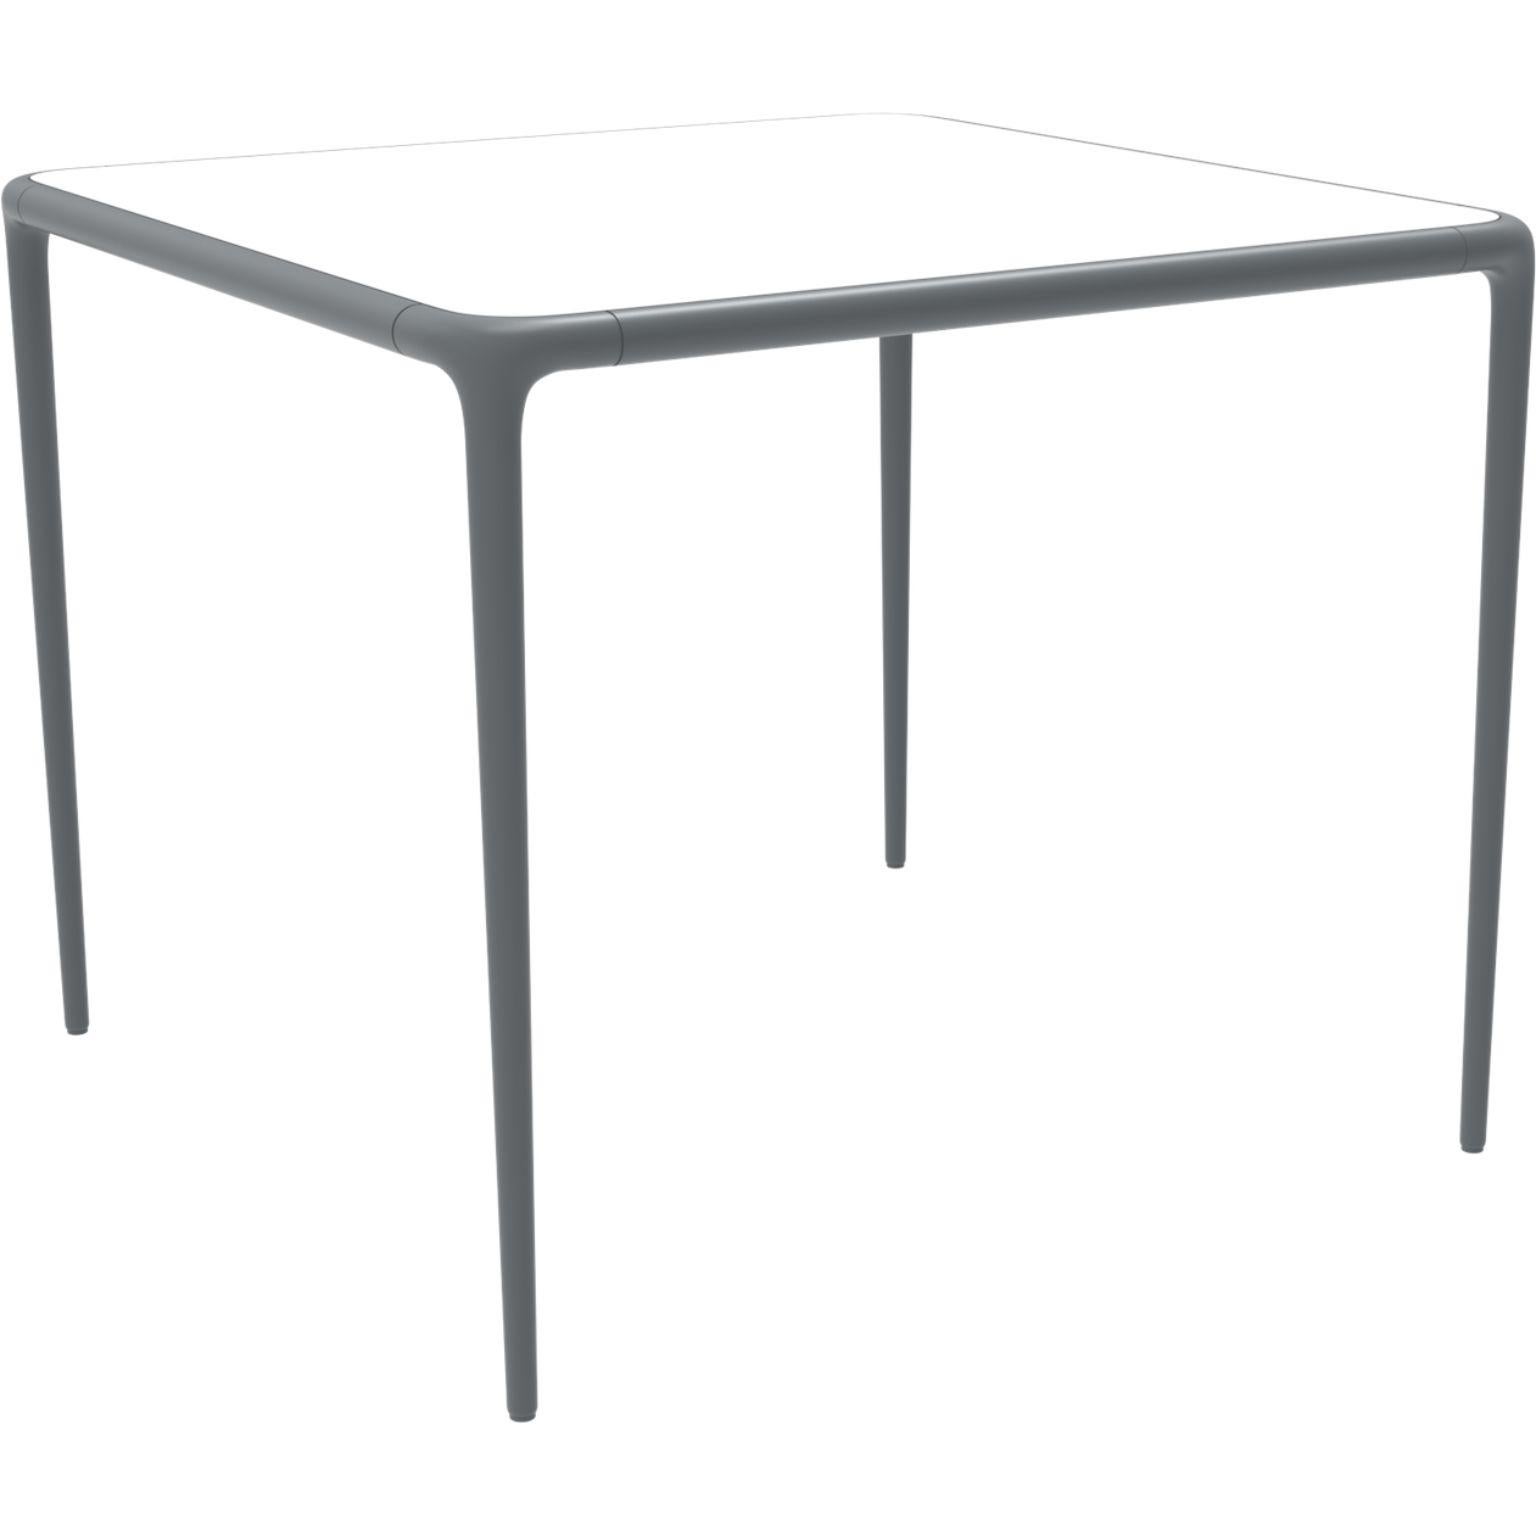 Xaloc grey glass top table 90 by Mowee.
Dimensions: D90 x W90 x H74 cm.
Material: Aluminum, tinted tempered glass top.
Also available in different aluminum colors and finishes (HPL Black Edge or Neolith). 

 Xaloc synthesizes the lines of